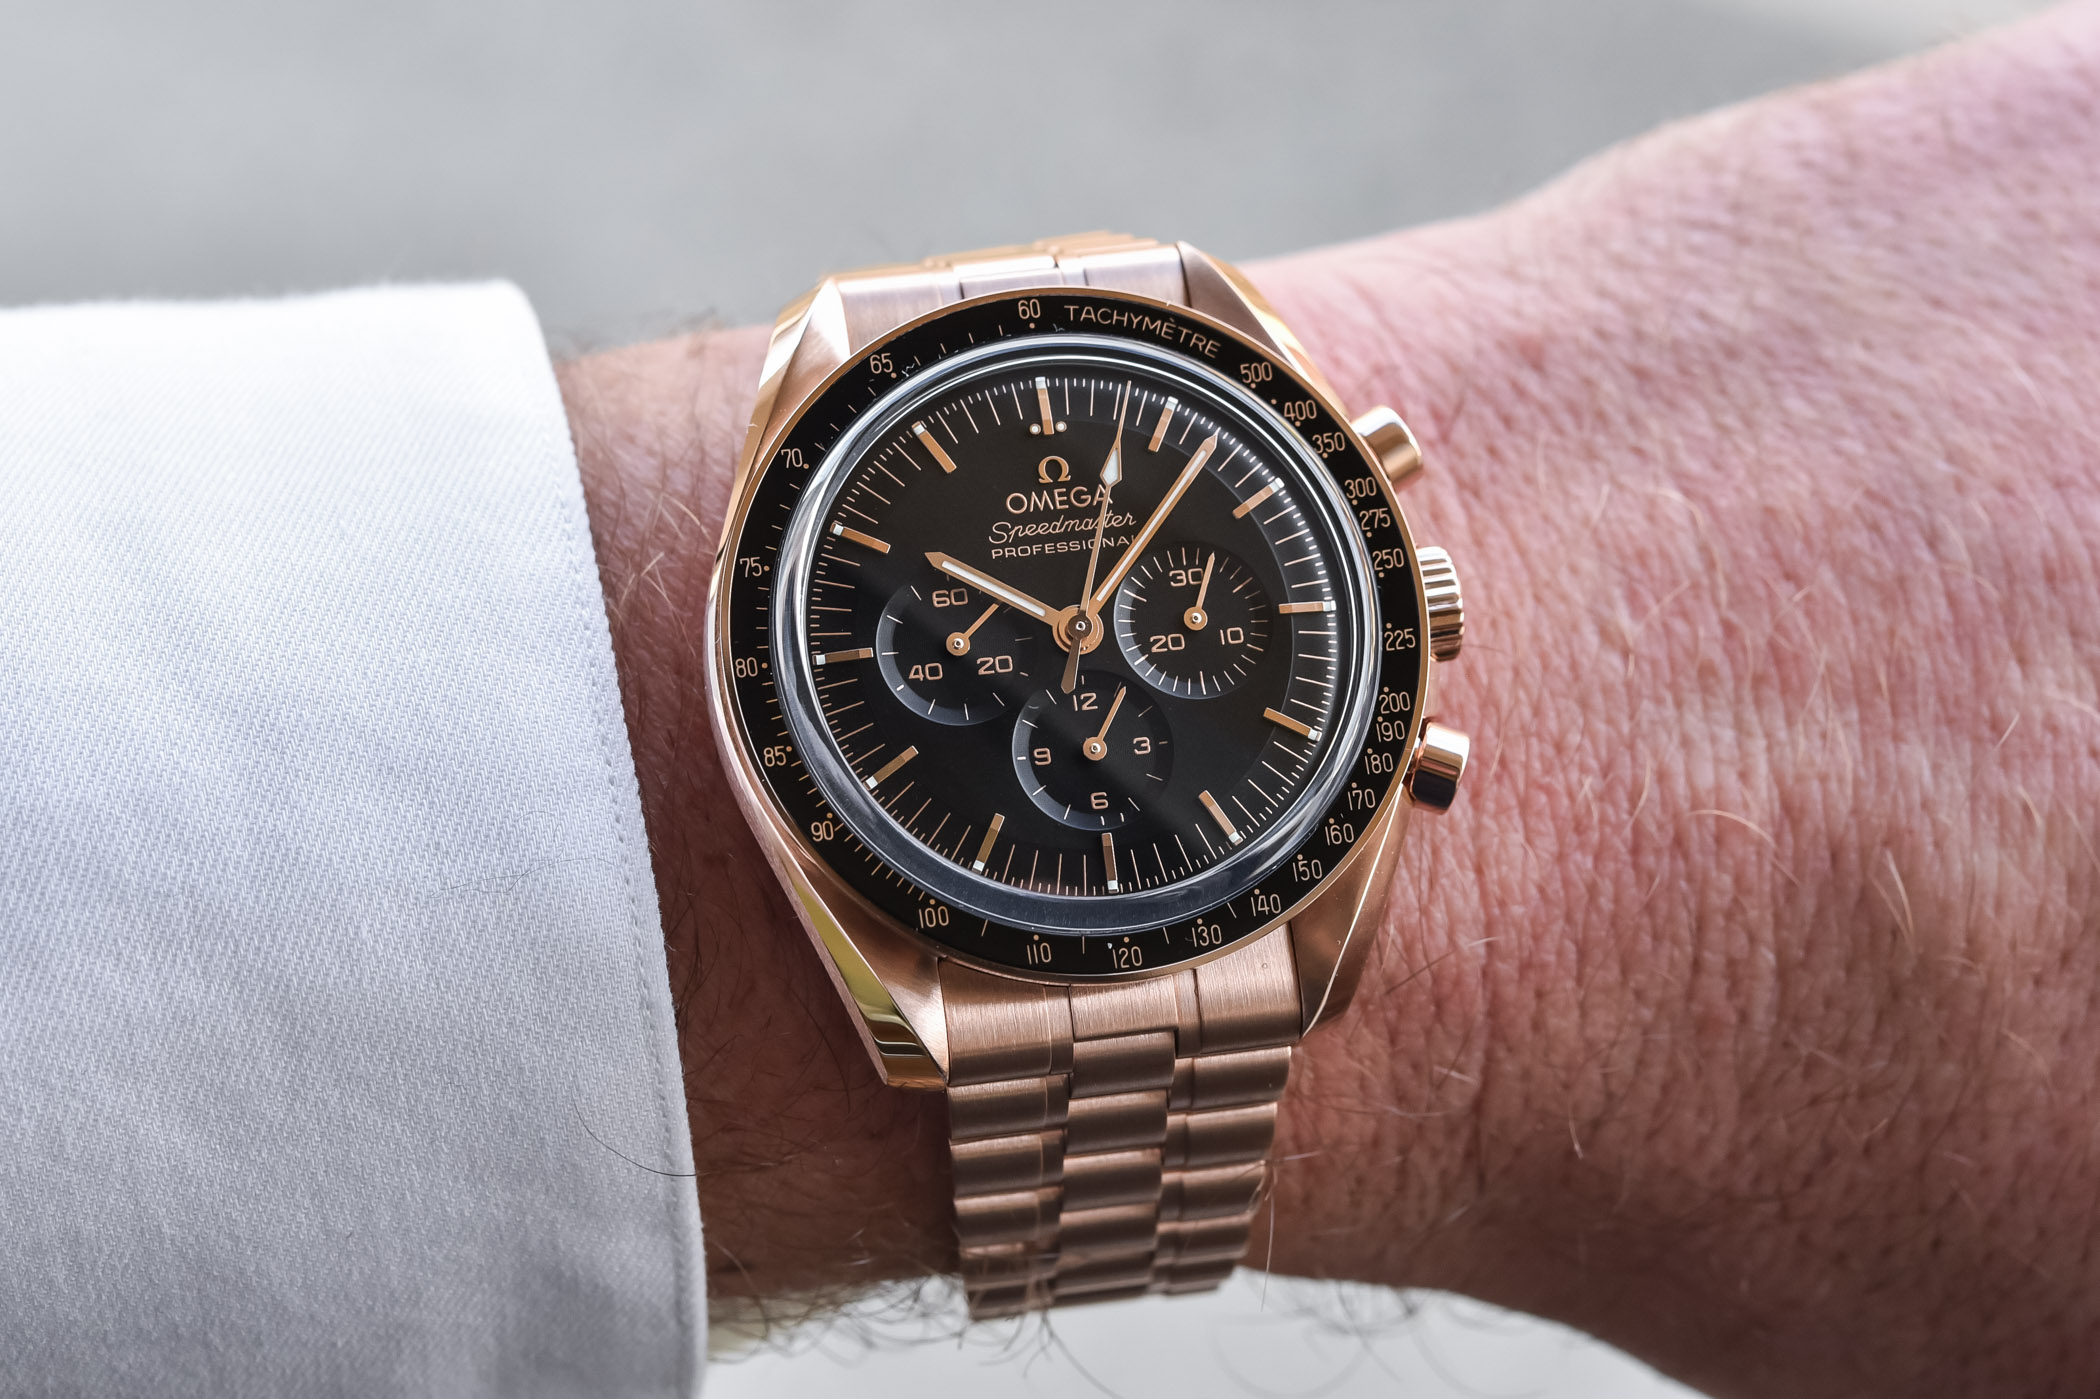 2021 Omega Speedmaster Moonwatch Profressional Co-Axial Master Chronometer Sedna Gold - 310.60.42.50.01.001